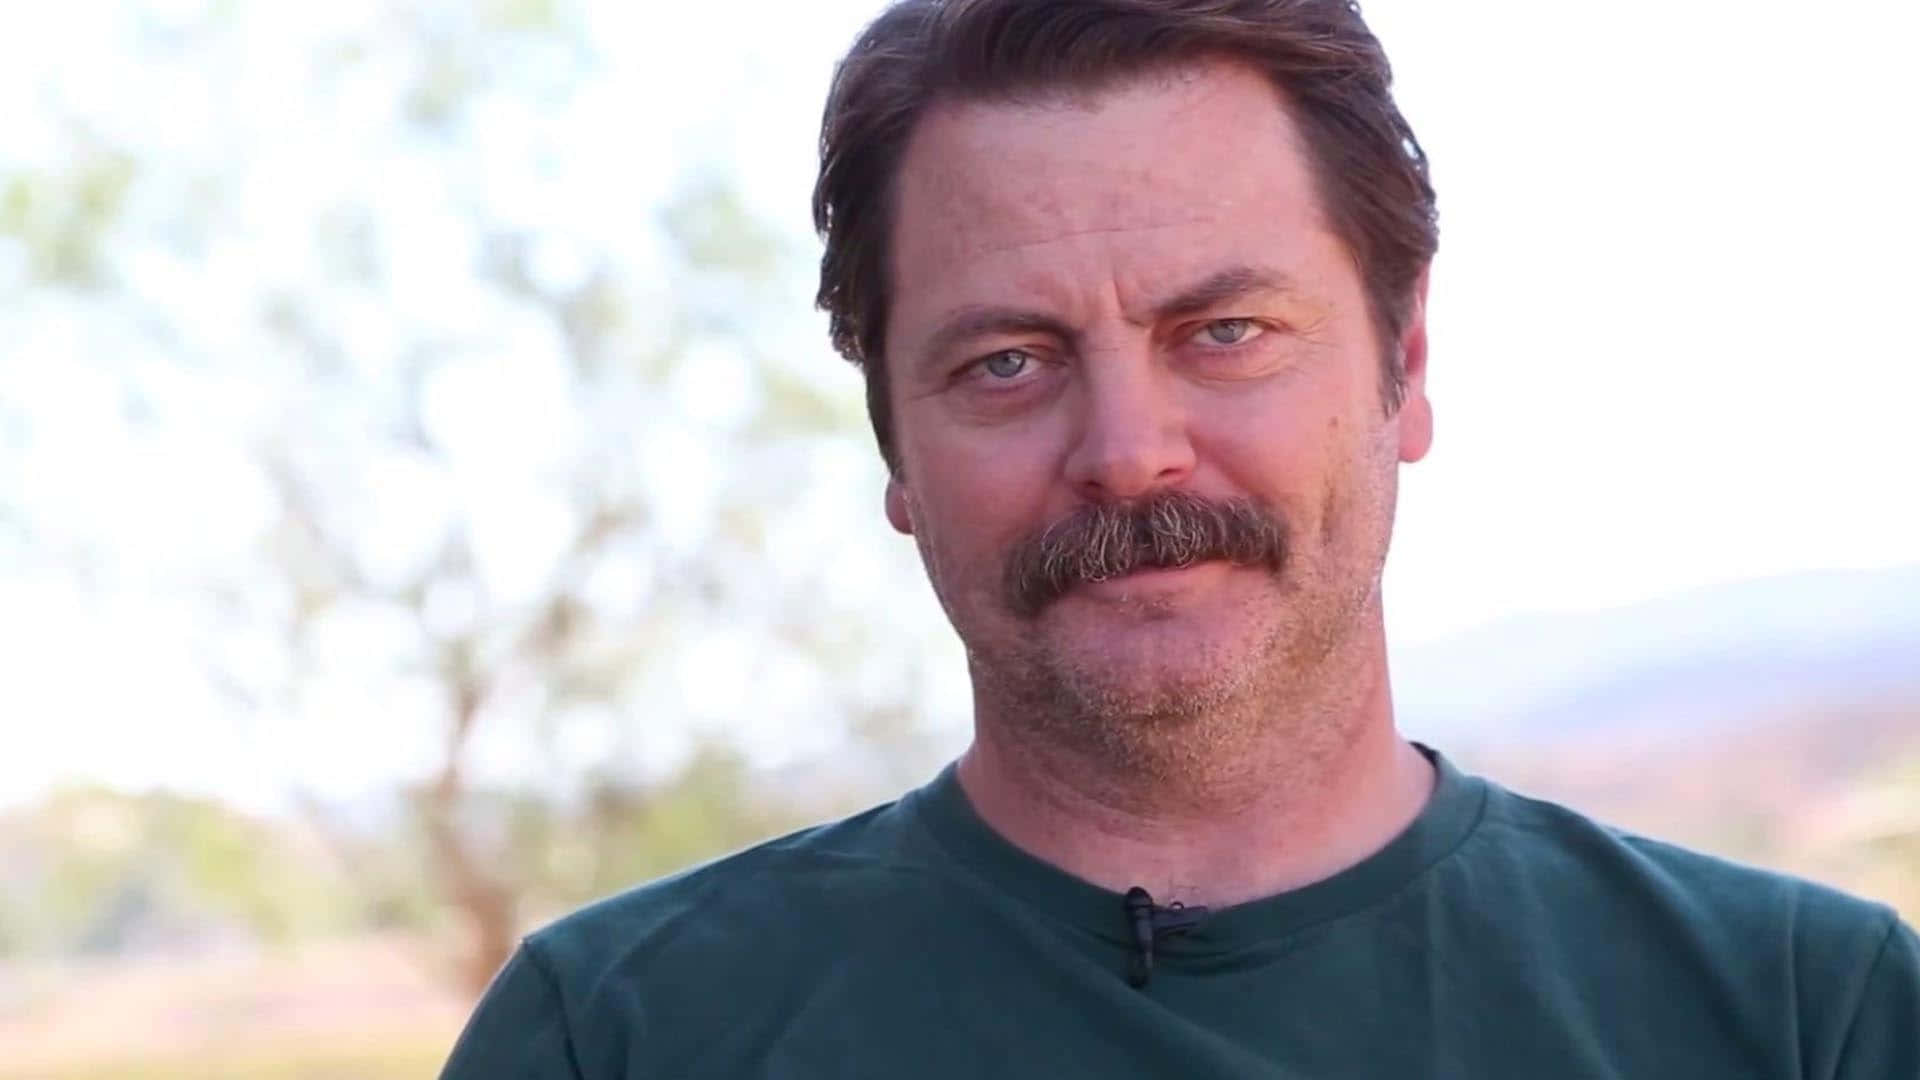 Nick Offerman Looks On In An Environment Of Nature And Peace. Background